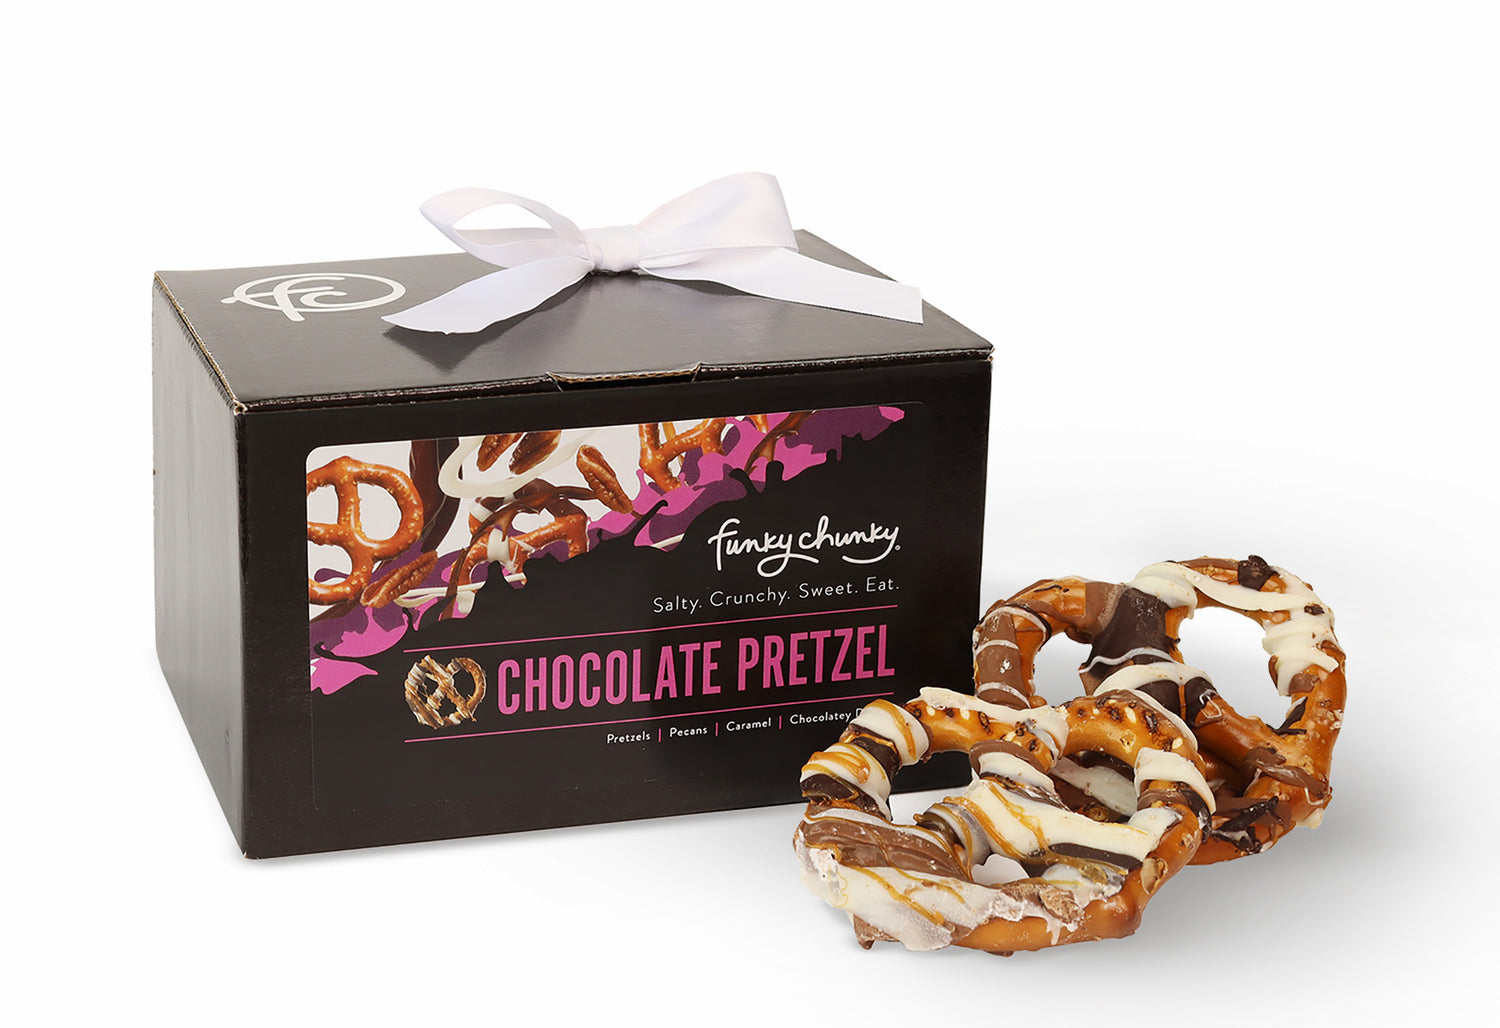 A GIFT FOR YOU Chocolate Covered Pretzels Gift Basket 4 Flavors GLUTEN FREE  Pretzels Snack Gift, Gourmet Holiday Gift